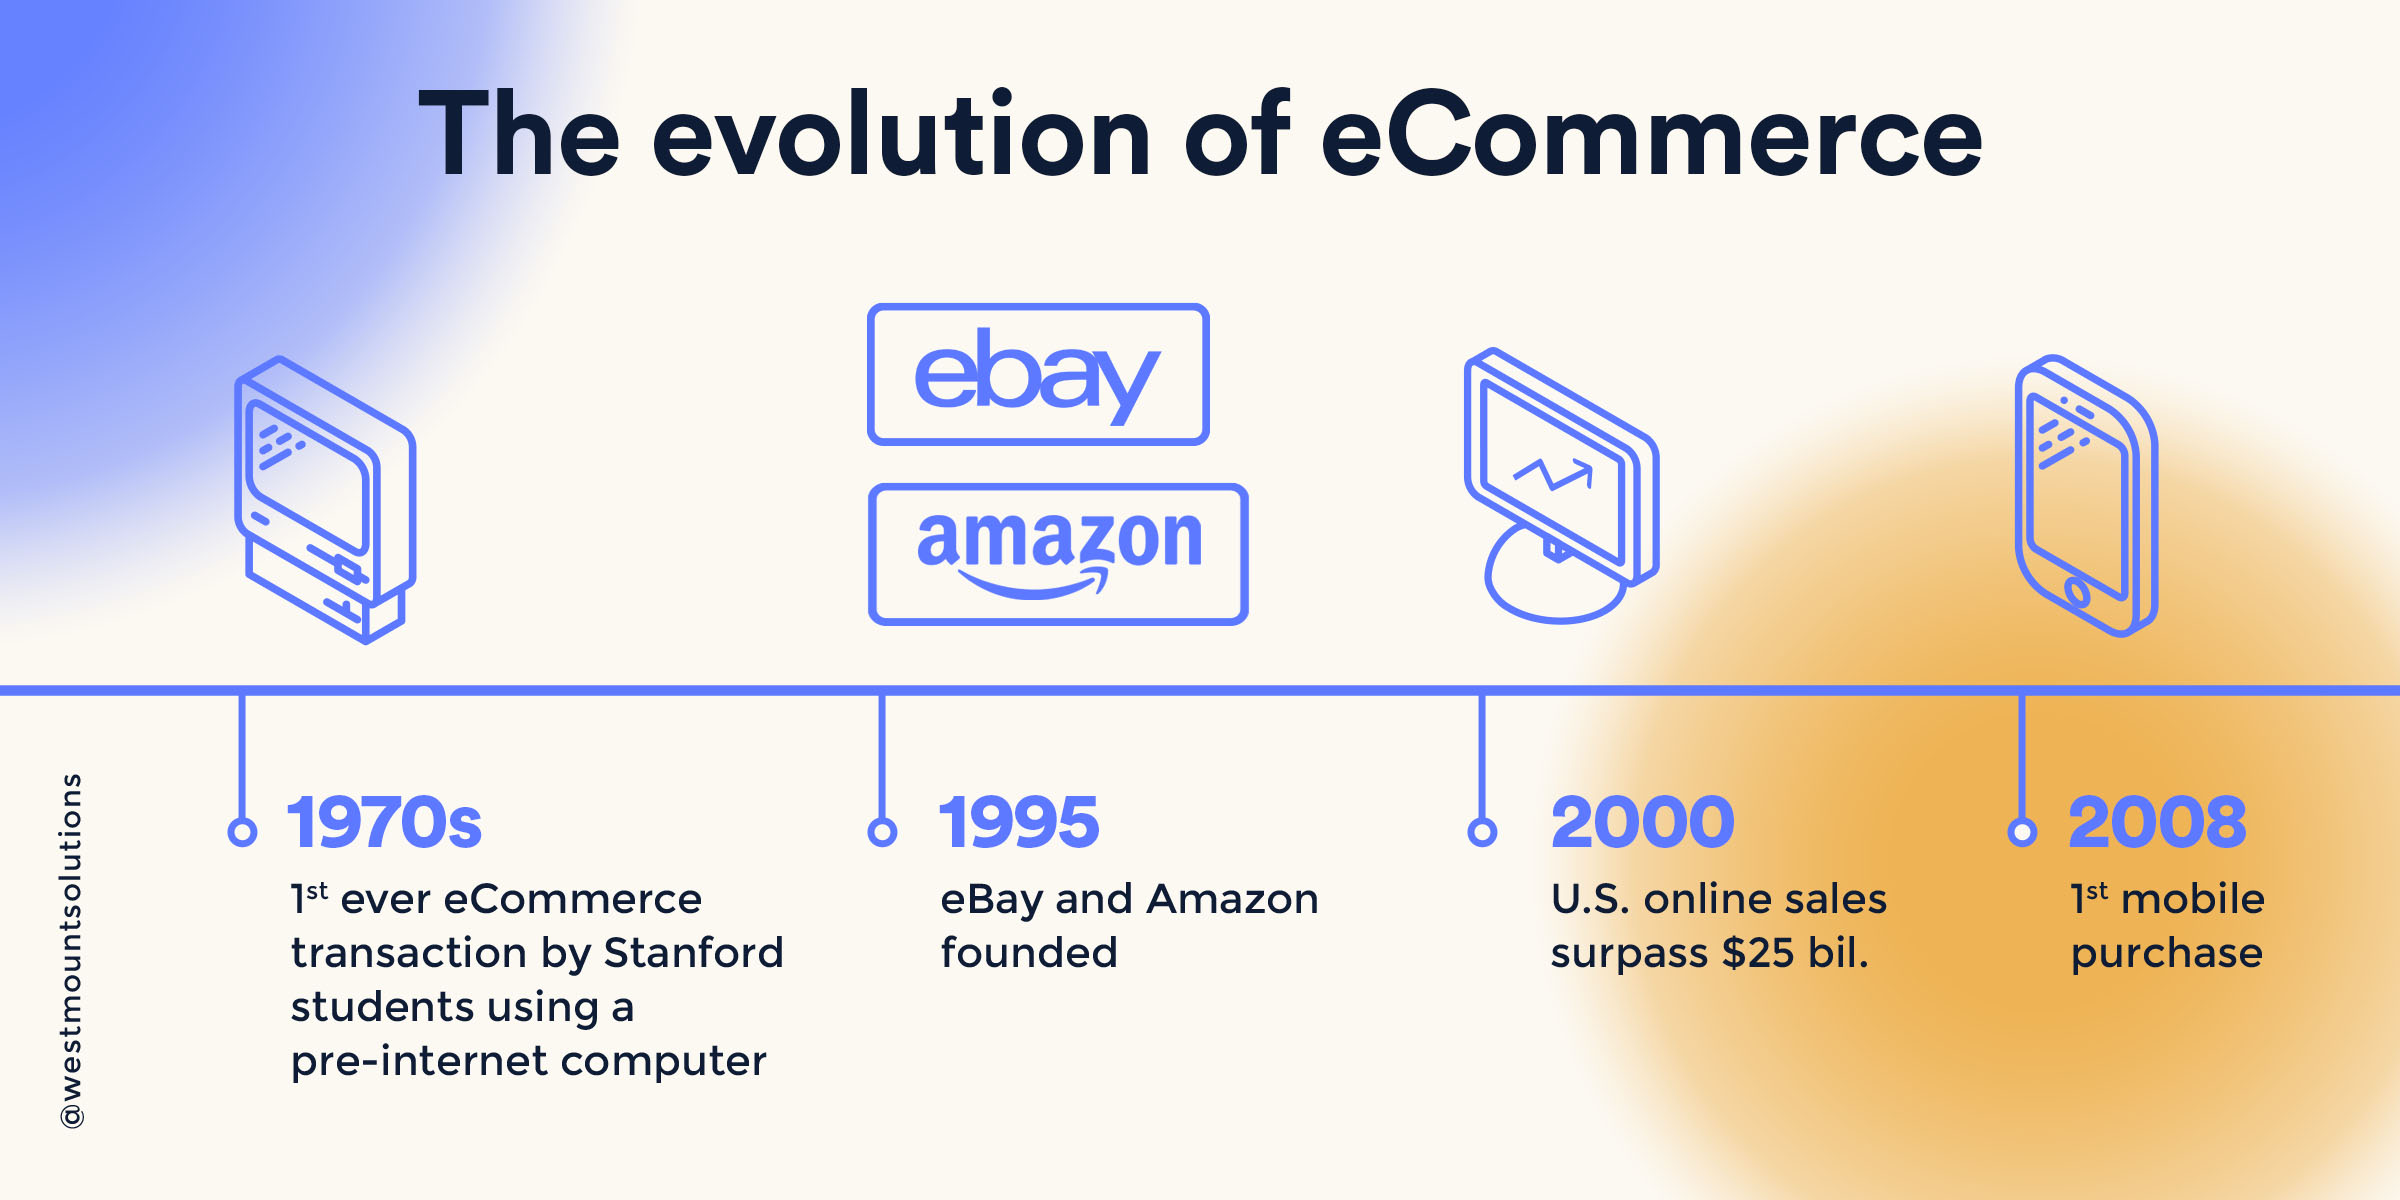  The image shows the evolution of eCommerce from the 1970s to 2008, with the first eCommerce transaction, the founding of eBay and Amazon, U.S. online sales surpassing $25 billion, and the first mobile purchase.